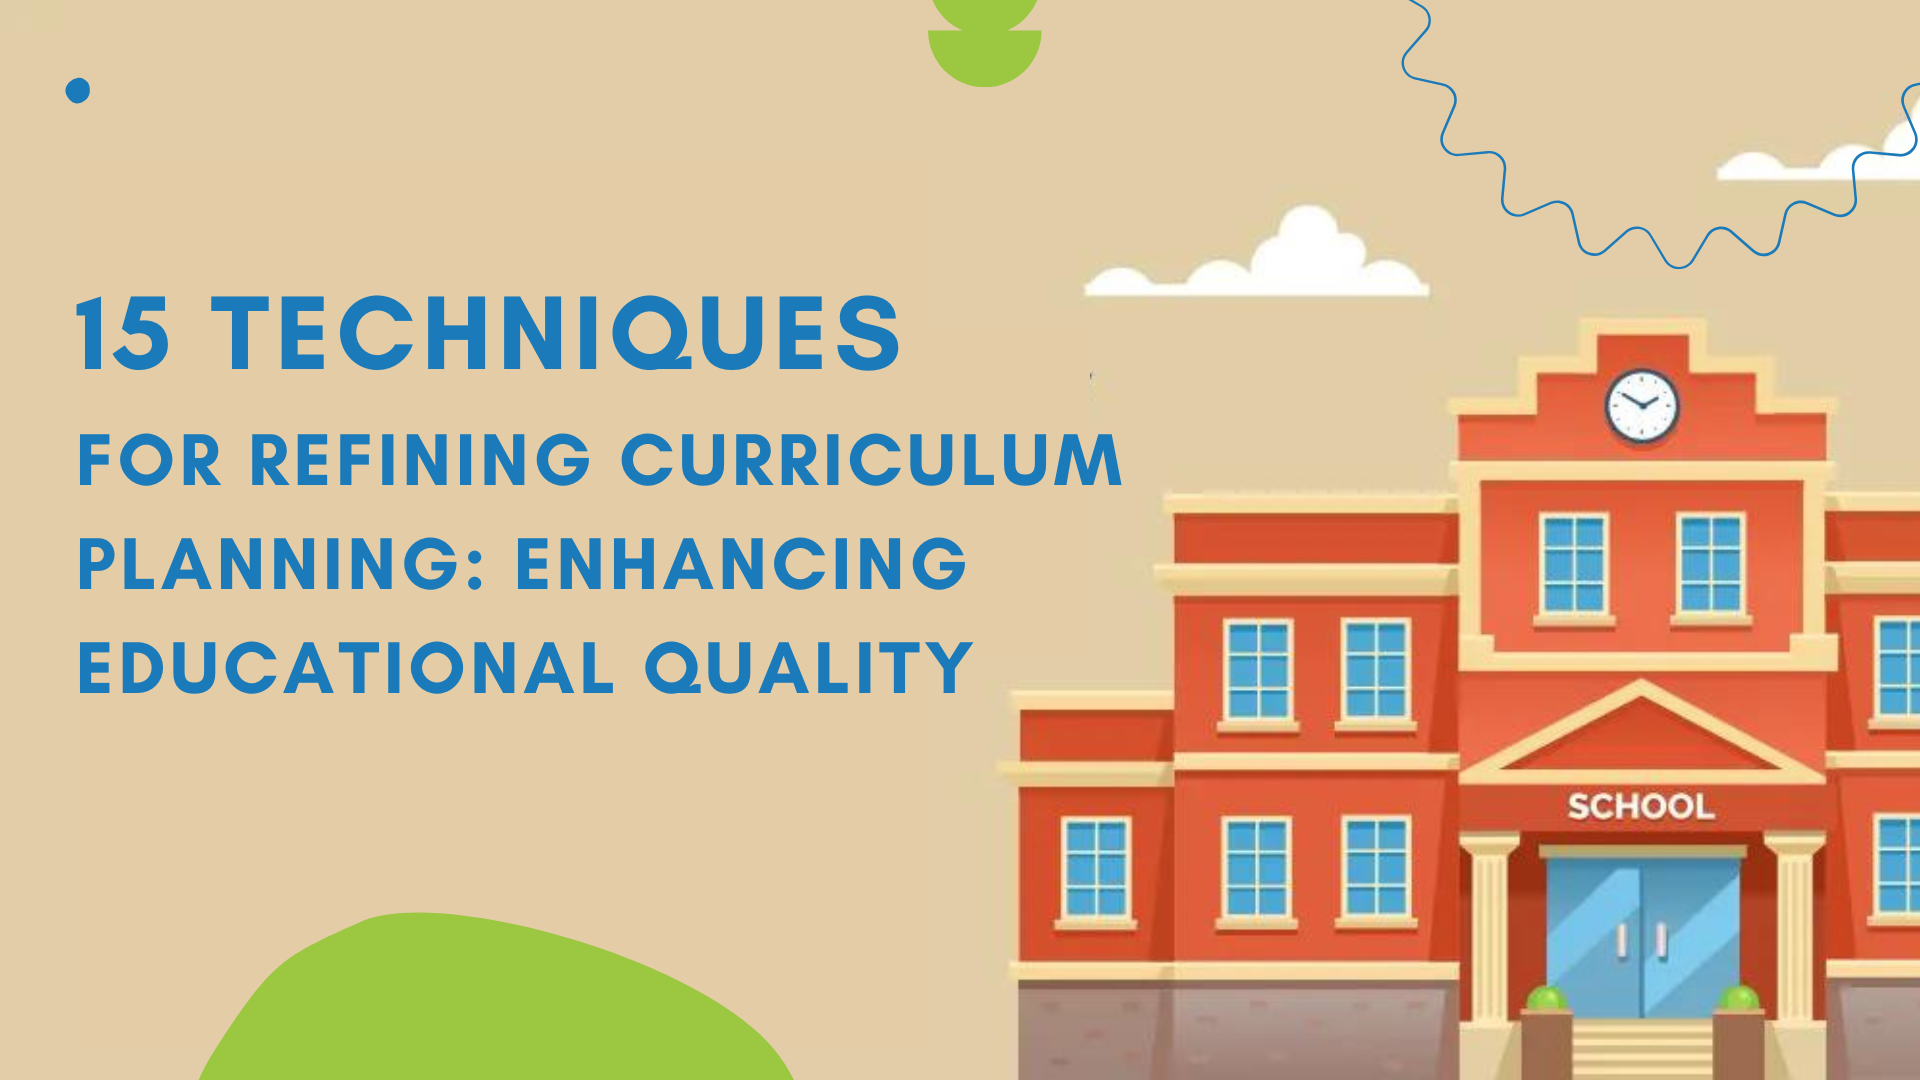 15 Techniques for Refining Curriculum Planning Enhancing Educational Quality